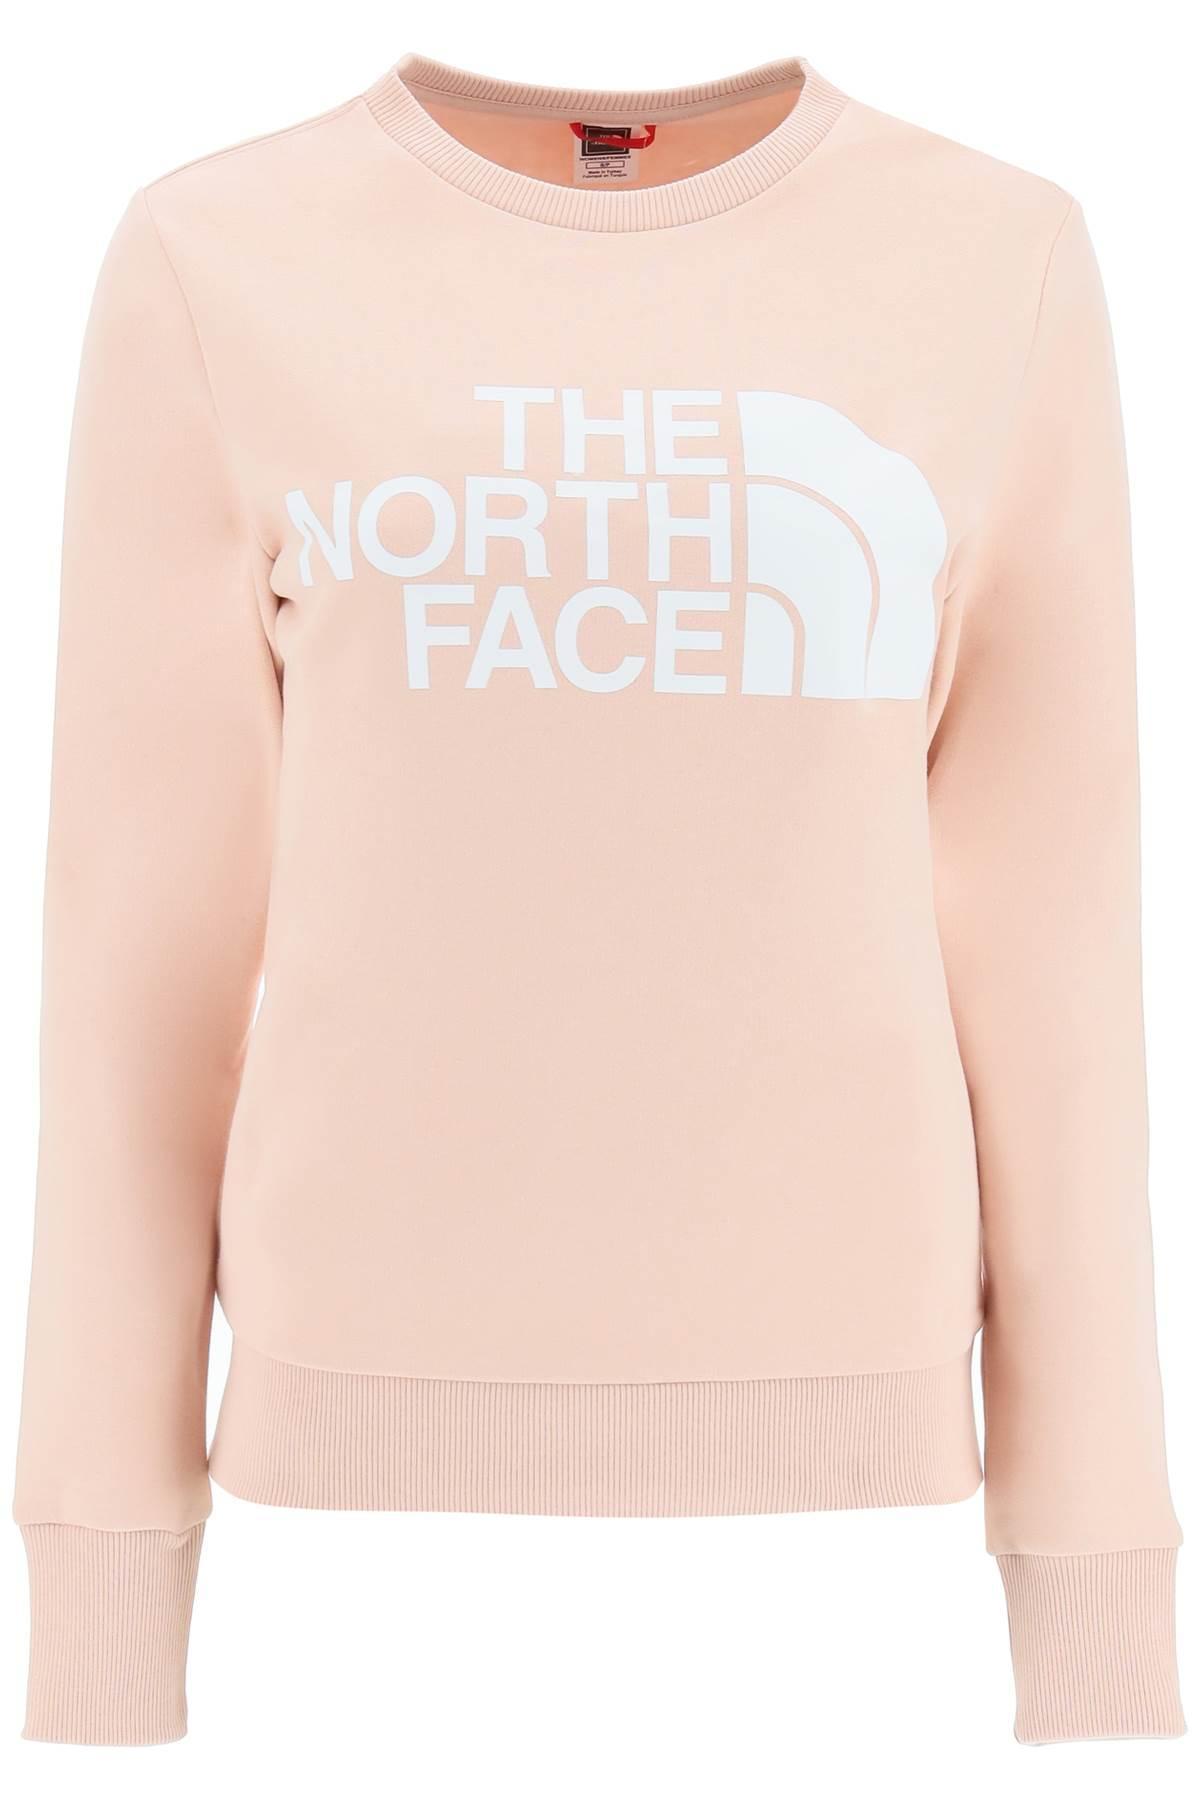 The North Face Logo Sweatshirt in Pink | Lyst